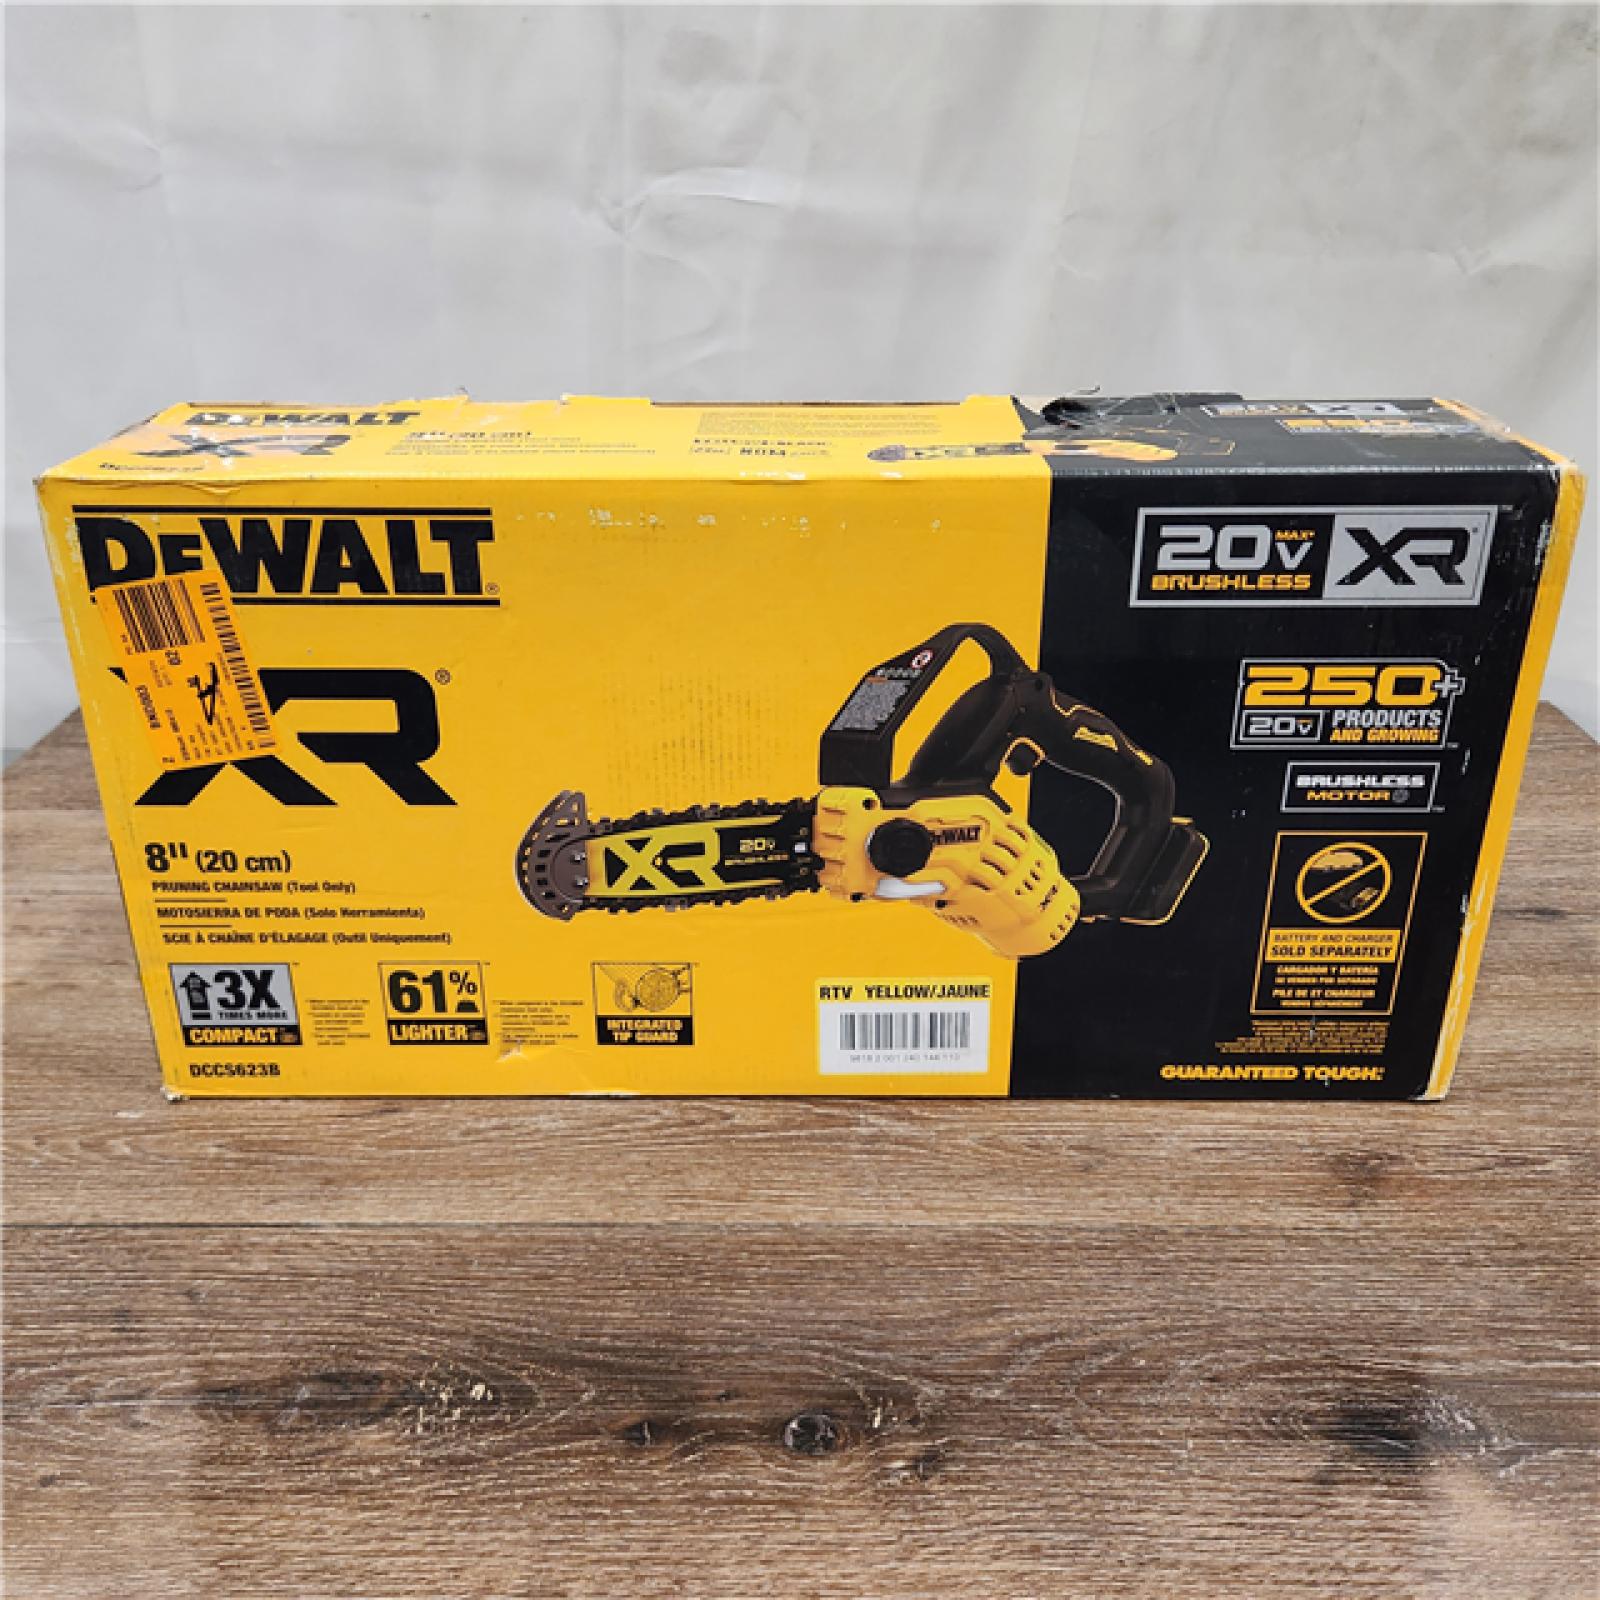 AS-IS Dewalt 20V 550 PSI  1 GPM Cordless Power Cleaner W/ 4 Nozzles Tool-Only DCPW550B